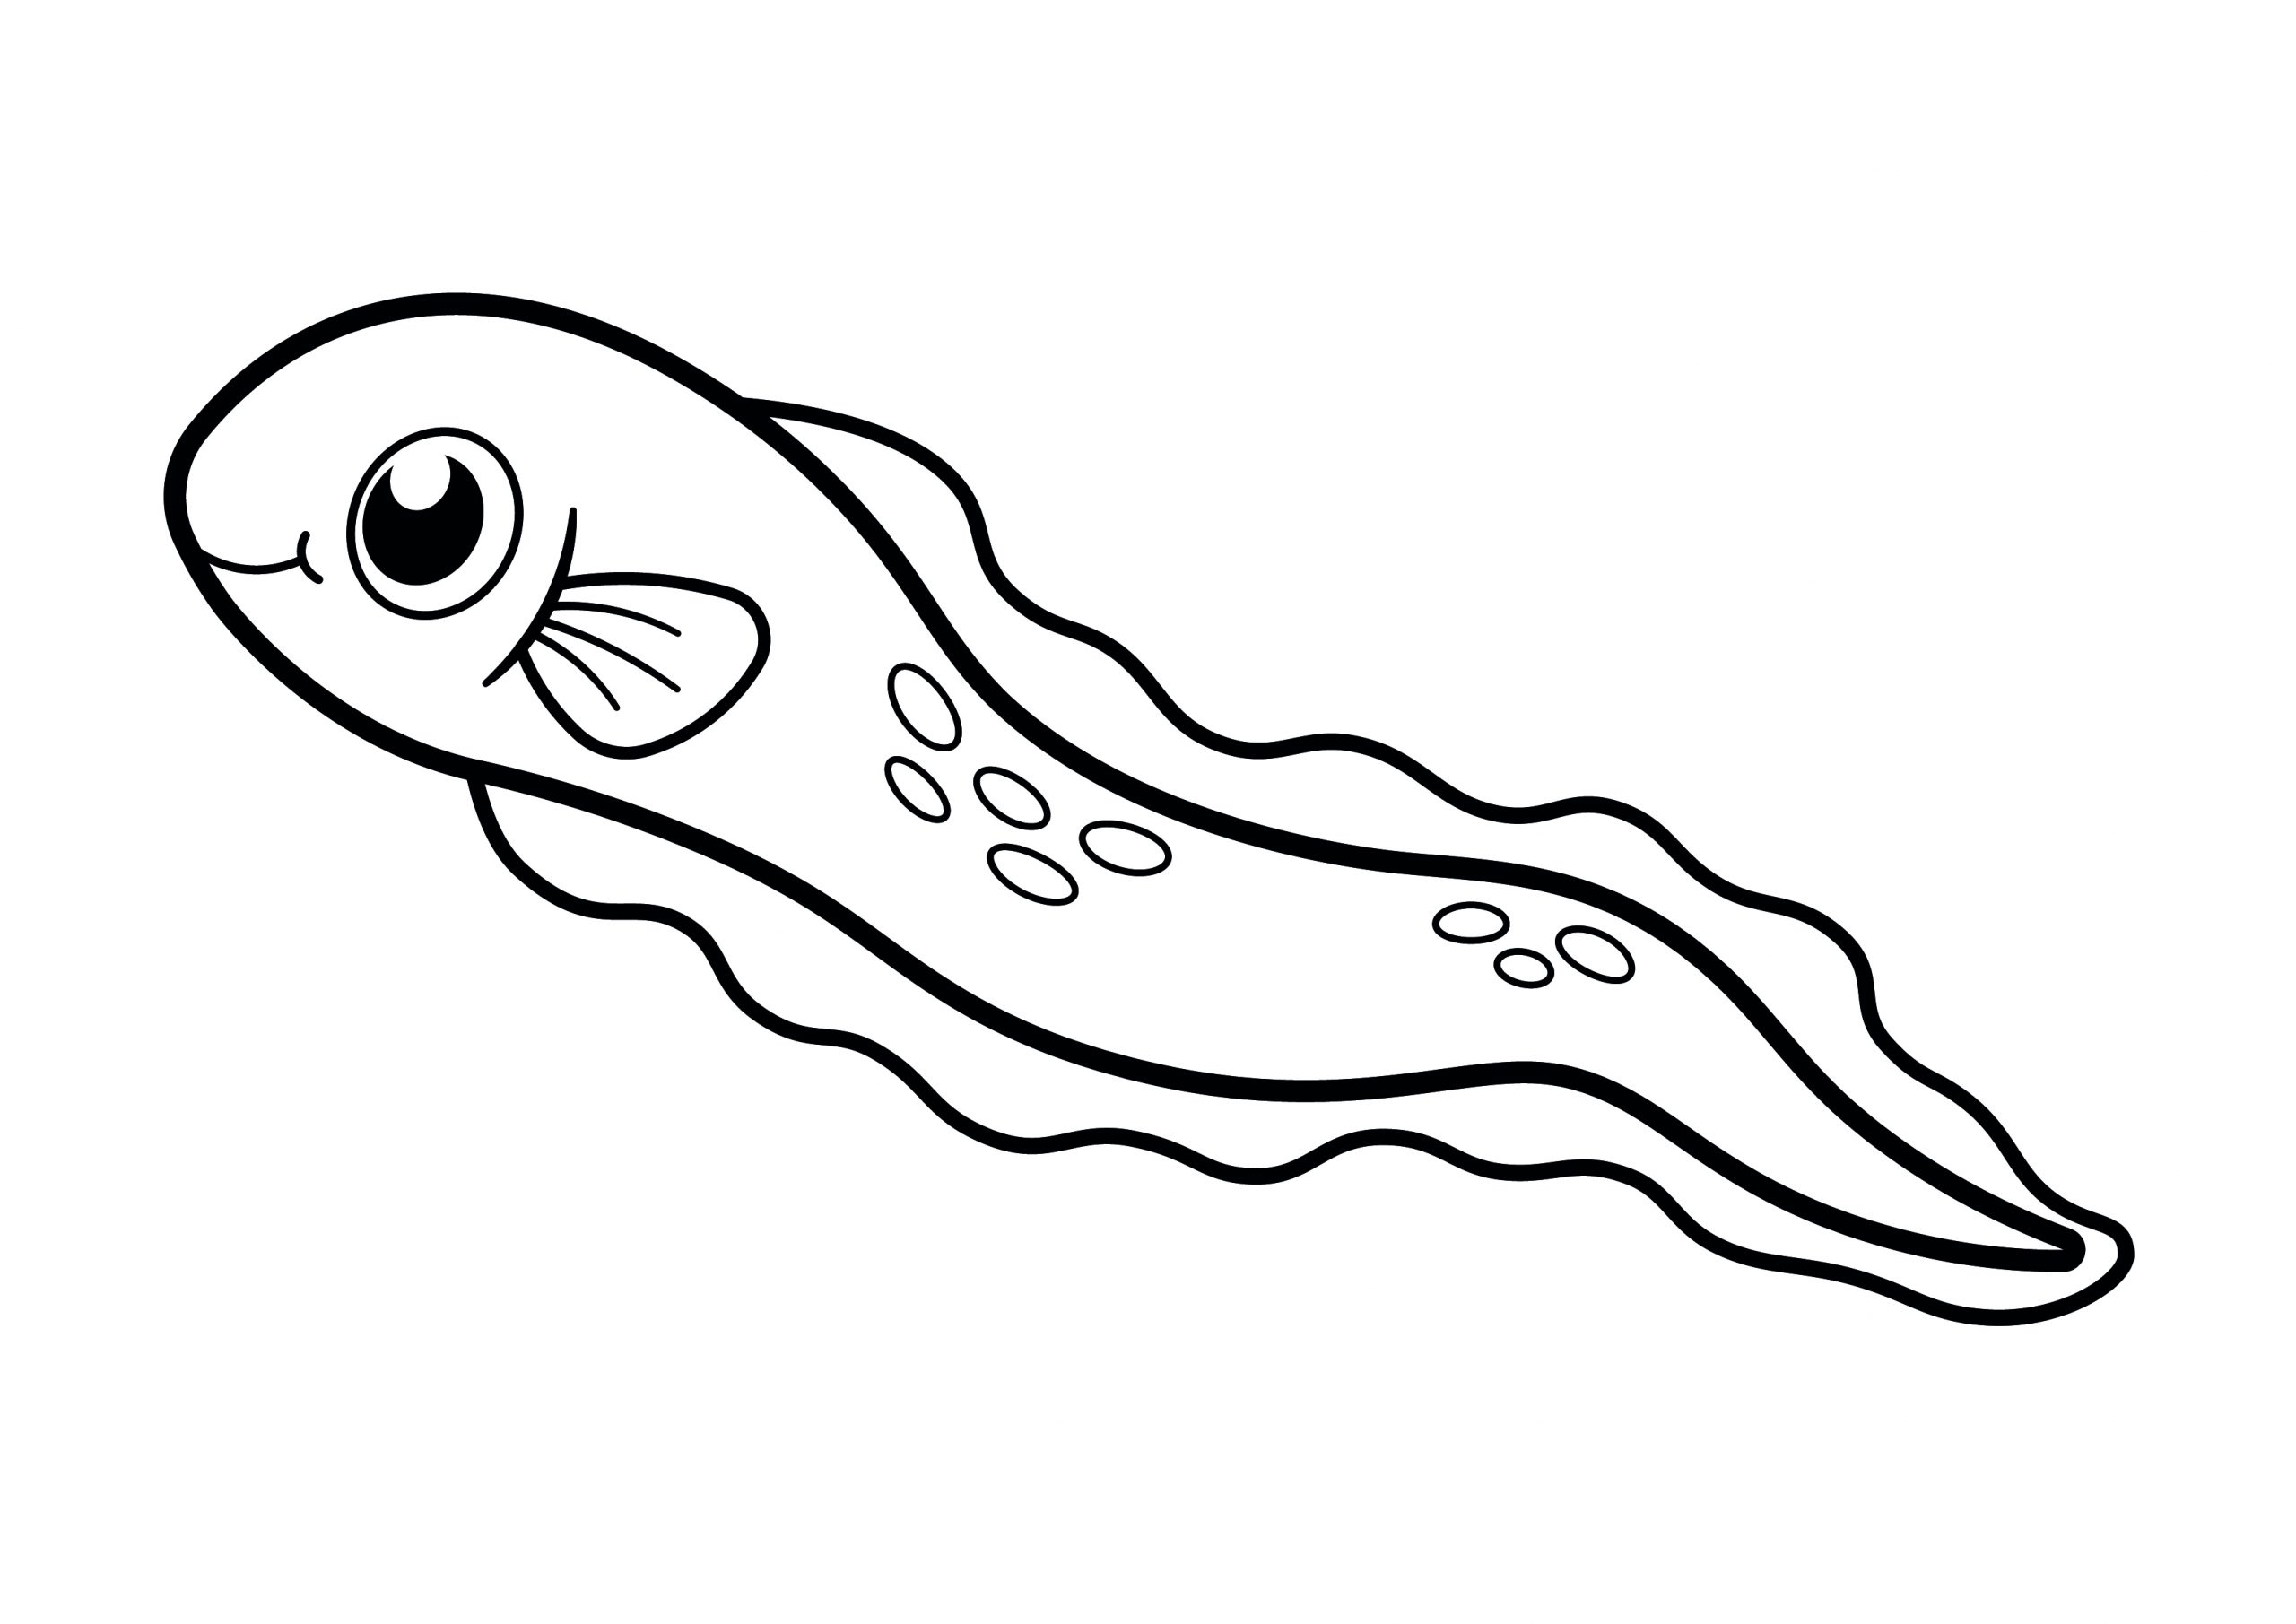 Simple Eel Colouring Page - Colouring Crafts